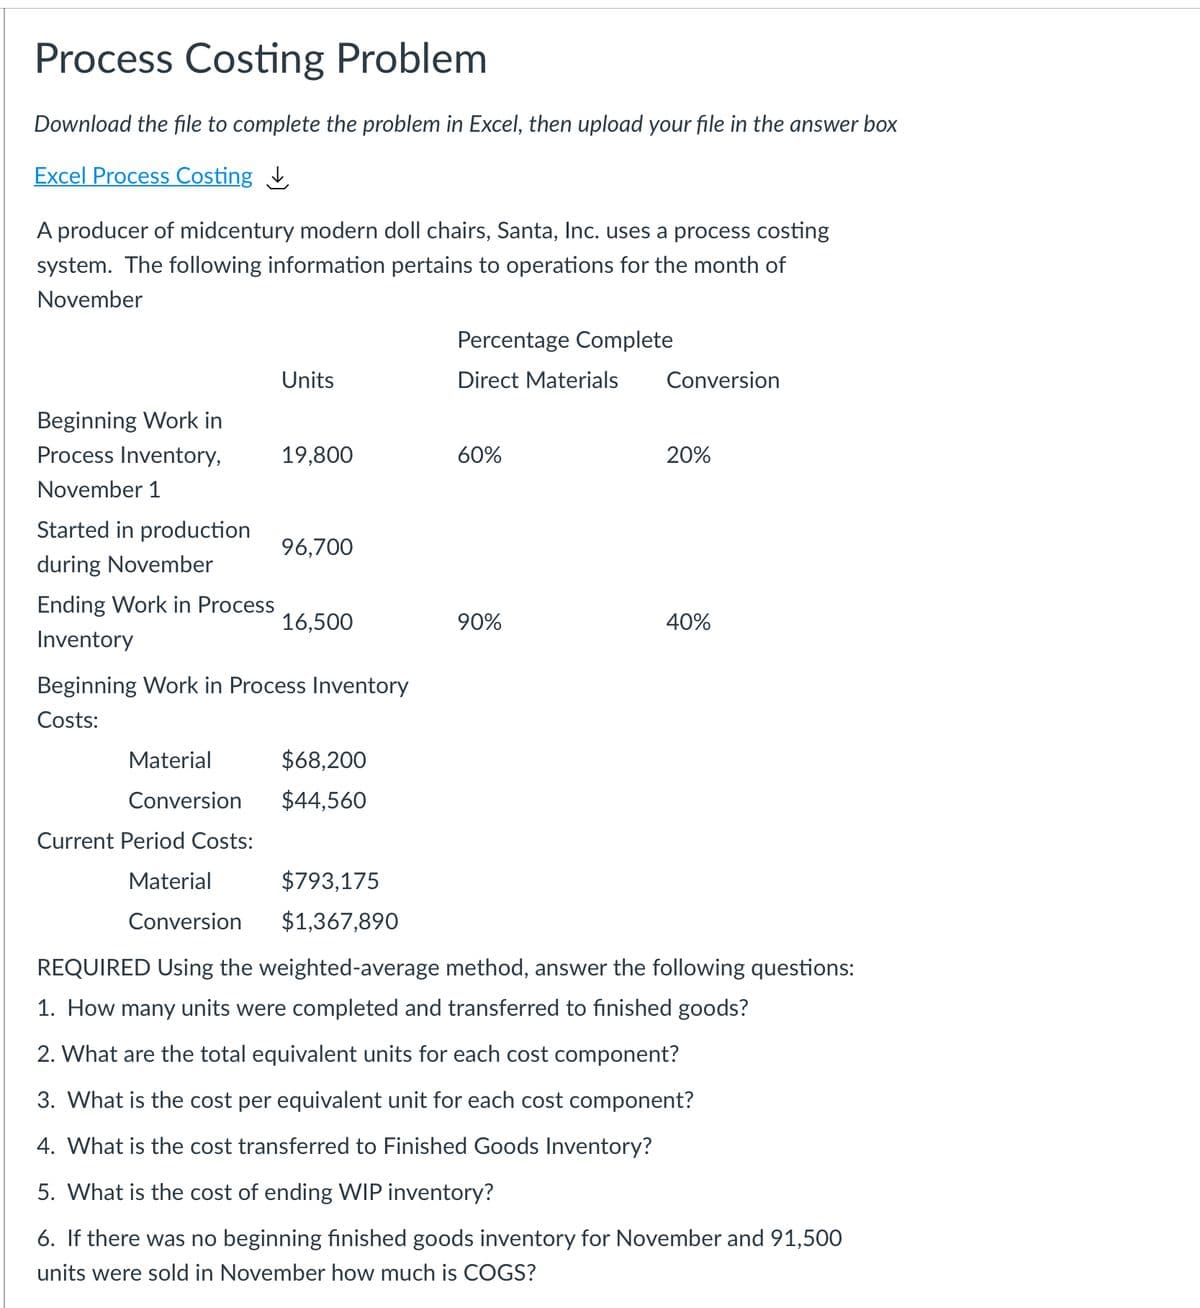 Process Costing Problem
Download the file to complete the problem in Excel, then upload your file in the answer box
Excel Process Costing
A producer of midcentury modern doll chairs, Santa, Inc. uses a process costing
system. The following information pertains to operations for the month of
November
Percentage Complete
Units
Direct Materials
Conversion
Beginning Work in
Process Inventory,
19,800
60%
20%
November 1
Started in production
96,700
during November
Ending Work in Process
16,500
90%
40%
Inventory
Beginning Work in Process Inventory
Costs:
Material
$68,200
Conversion
$44,560
Current Period Costs:
Material
$793,175
Conversion
$1,367,890
REQUIRED Using the weighted-average method, answer the following questions:
1. How many units were completed and transferred to finished goods?
2. What are the total equivalent units for each cost component?
3. What is the cost per equivalent unit for each cost component?
4. What is the cost transferred to Finished Goods Inventory?
5. What is the cost of ending WIP inventory?
6. If there was no beginning finished goods inventory for November and 91,500
units were sold in November how much is COGS?
